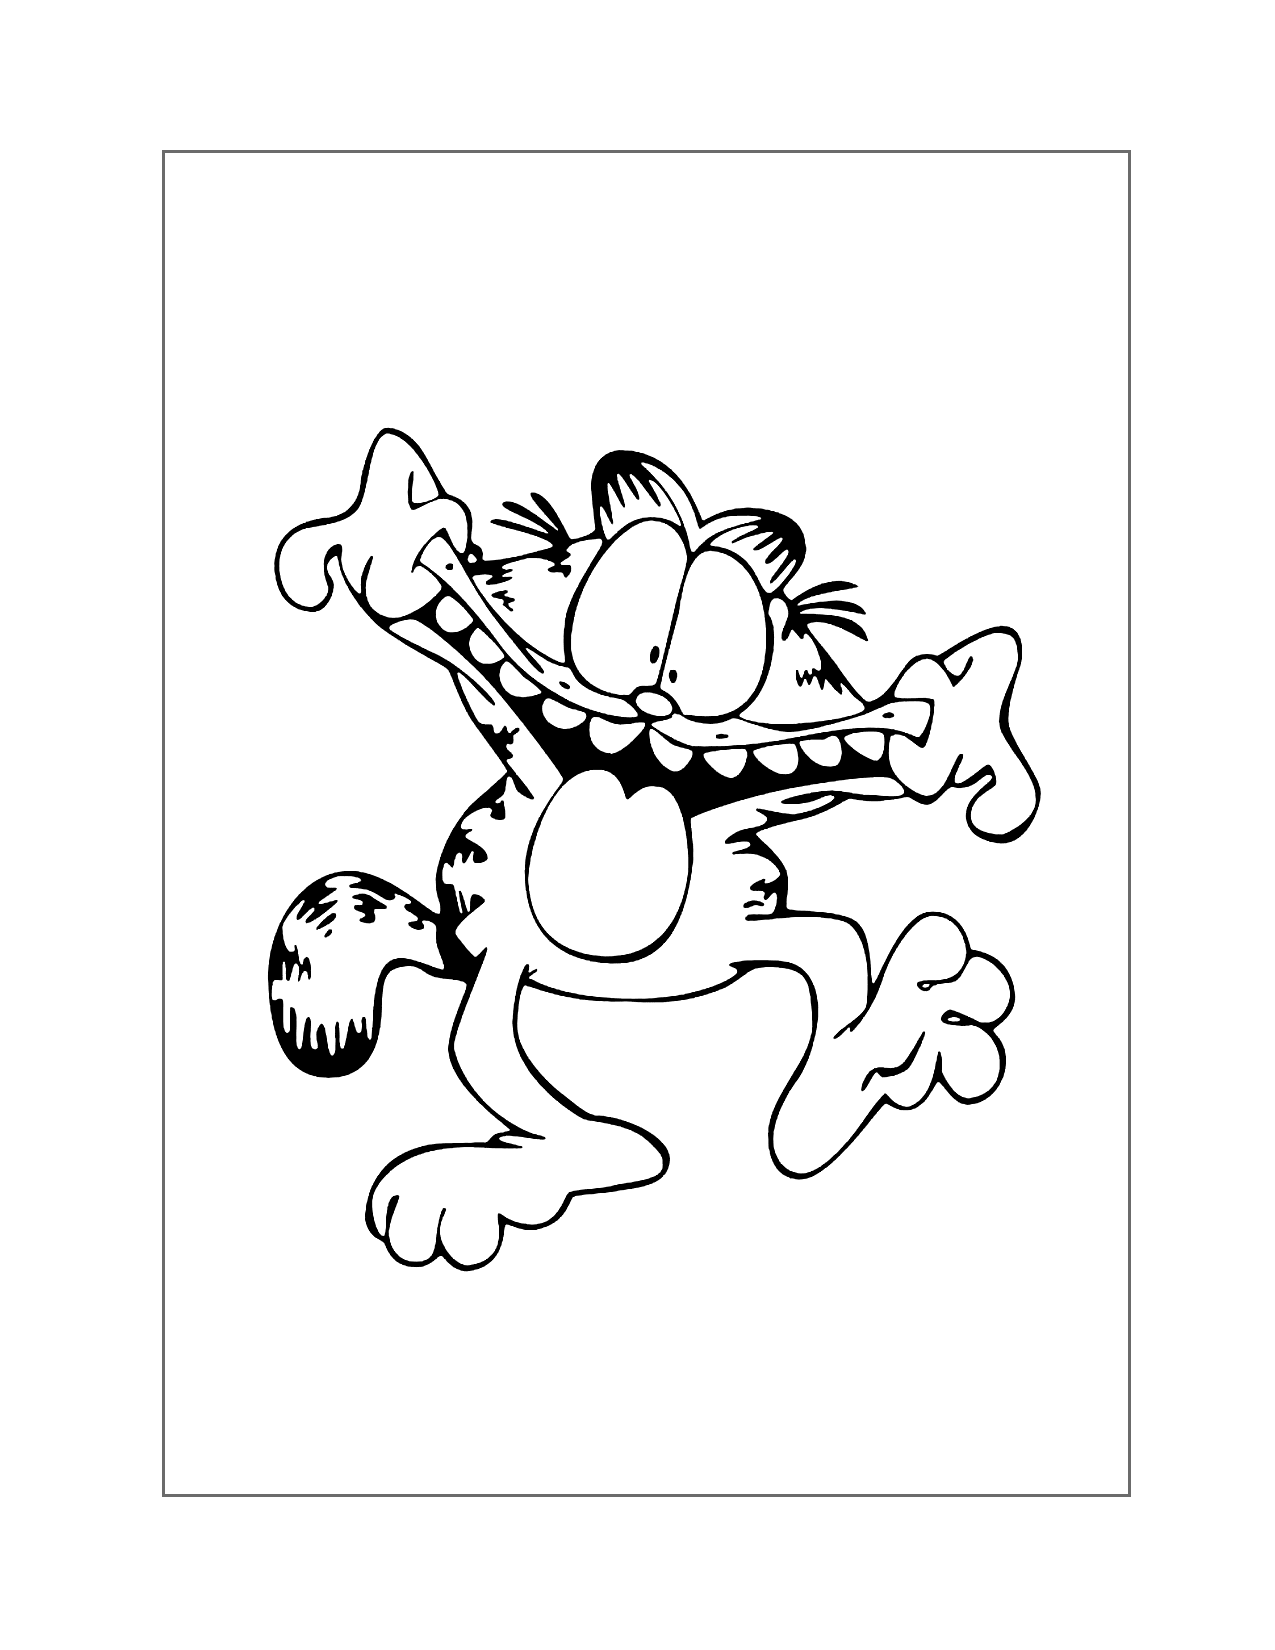 Garfield Making A Funny Face Coloring Page